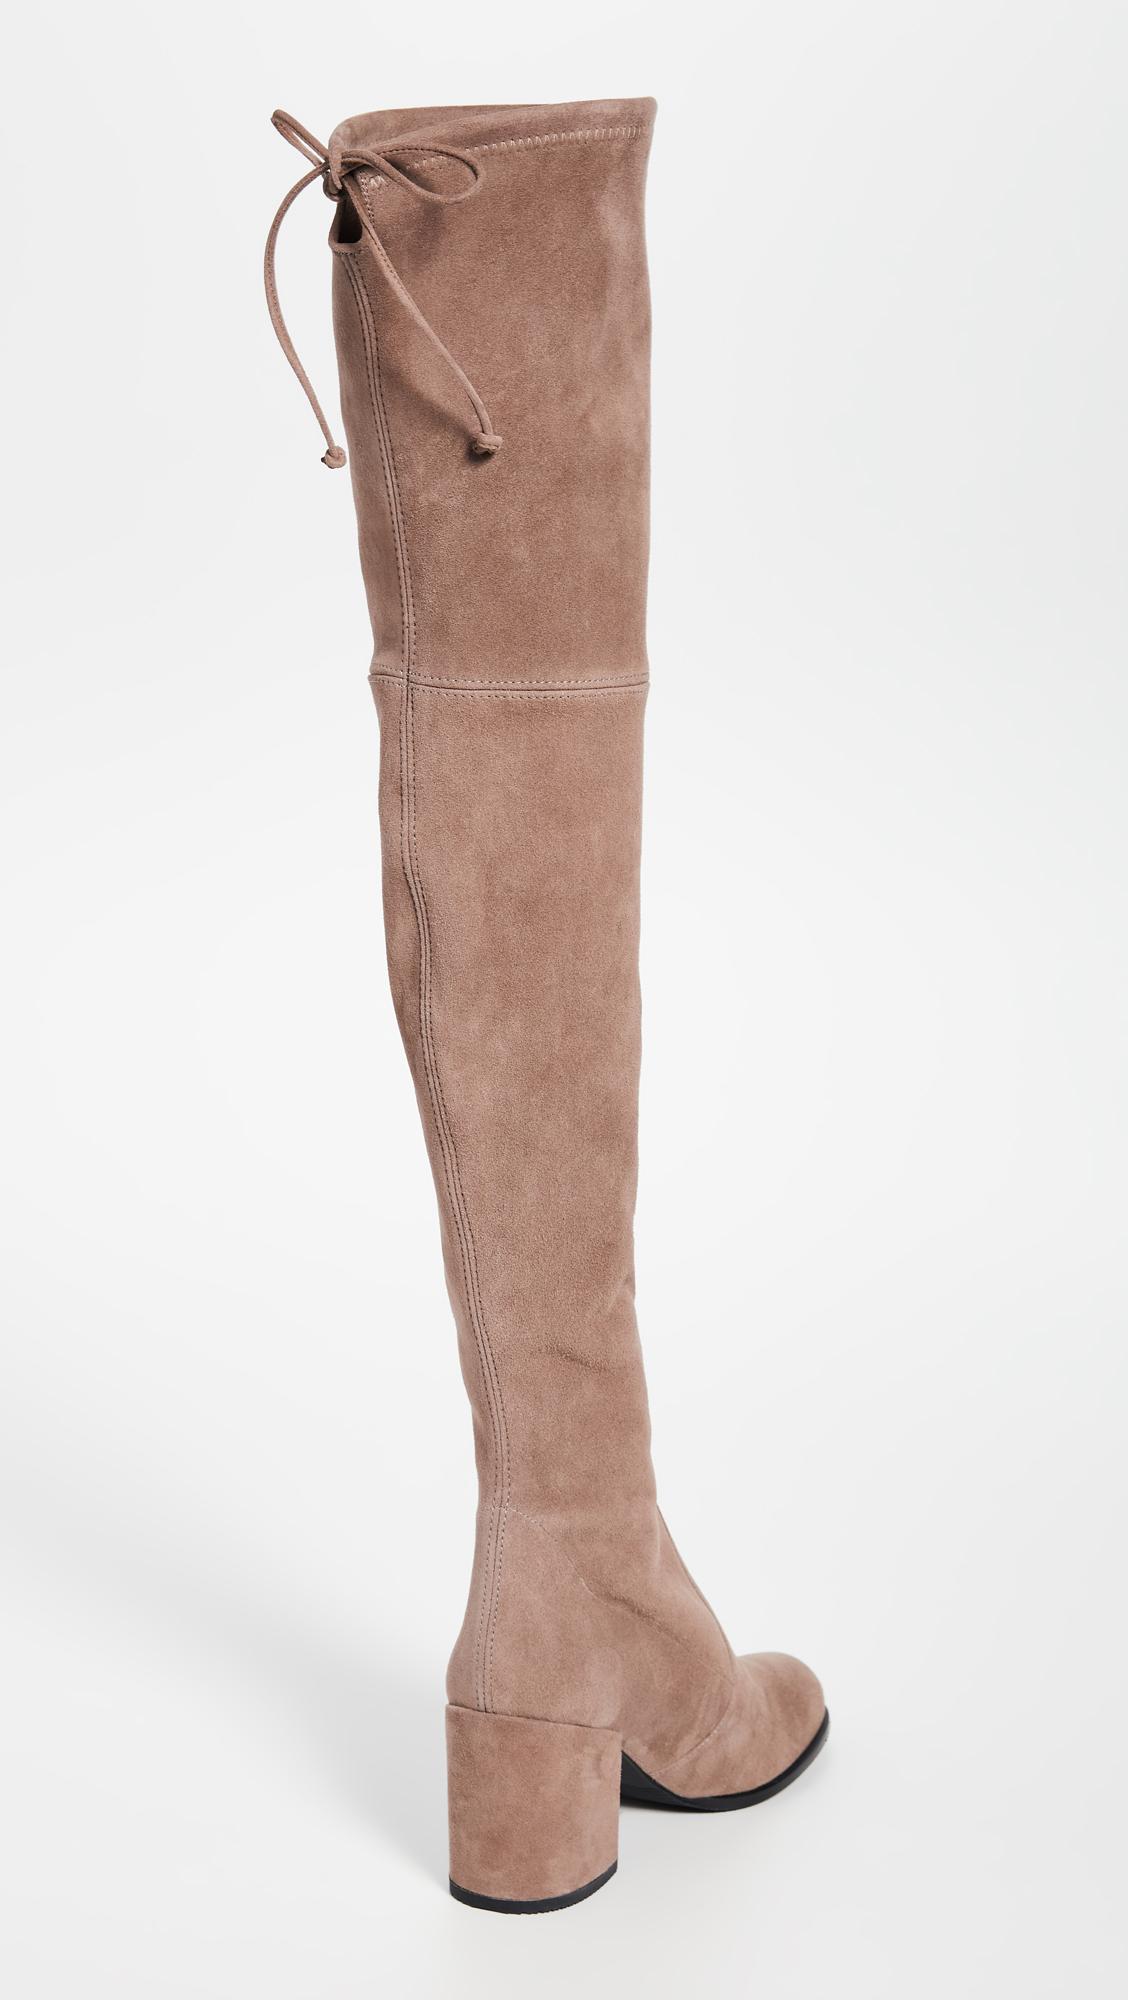 Stuart Weitzman Suede Hiline Over The Knee Boots in Taupe (Brown) - Lyst